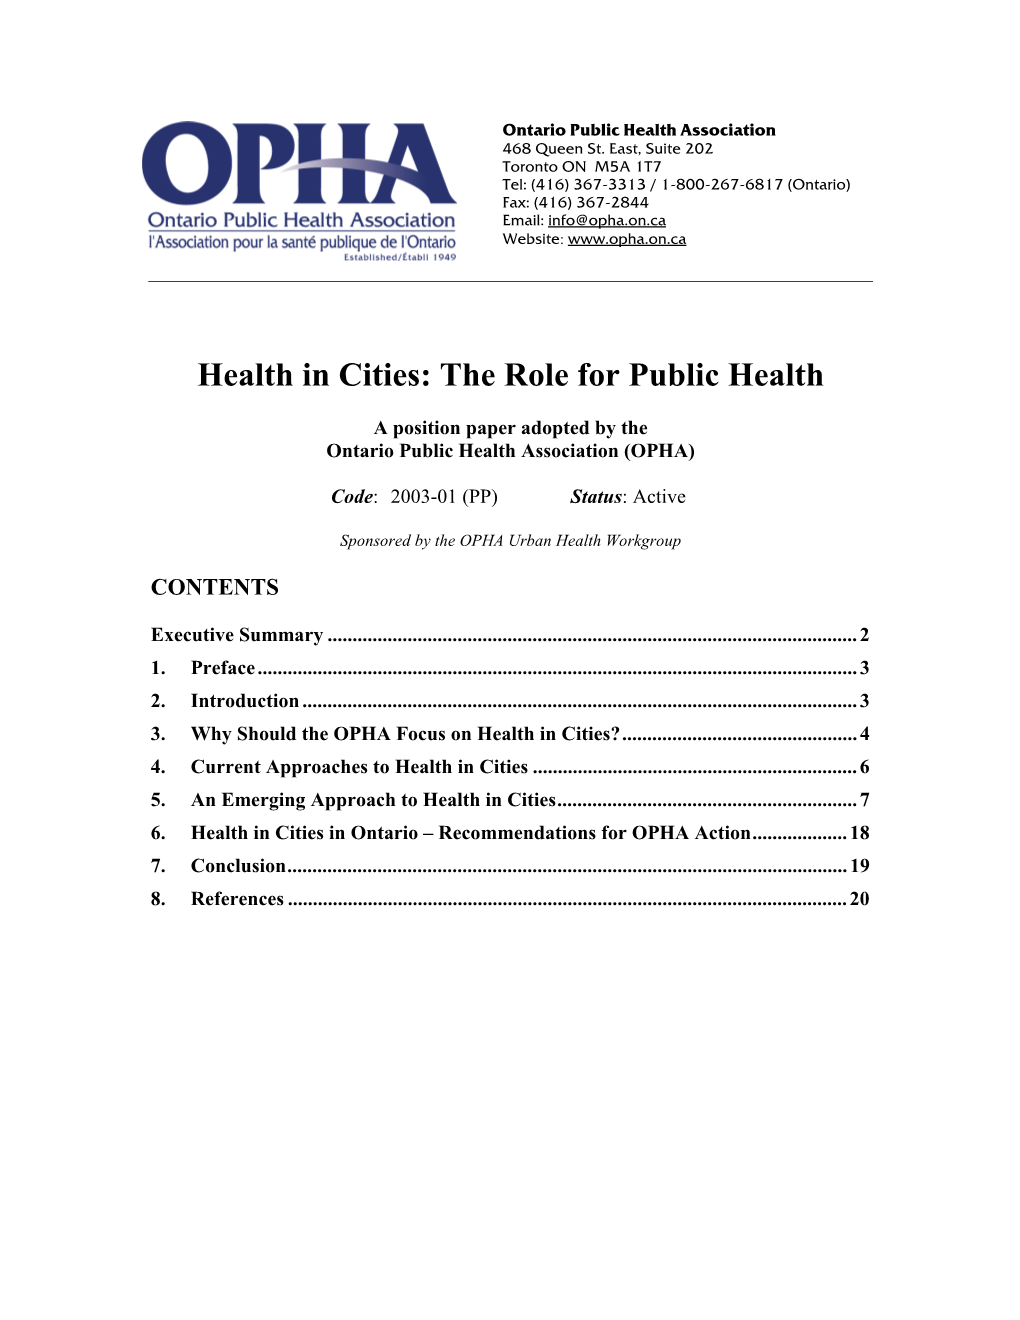 Health in Cities: the Role for Public Health